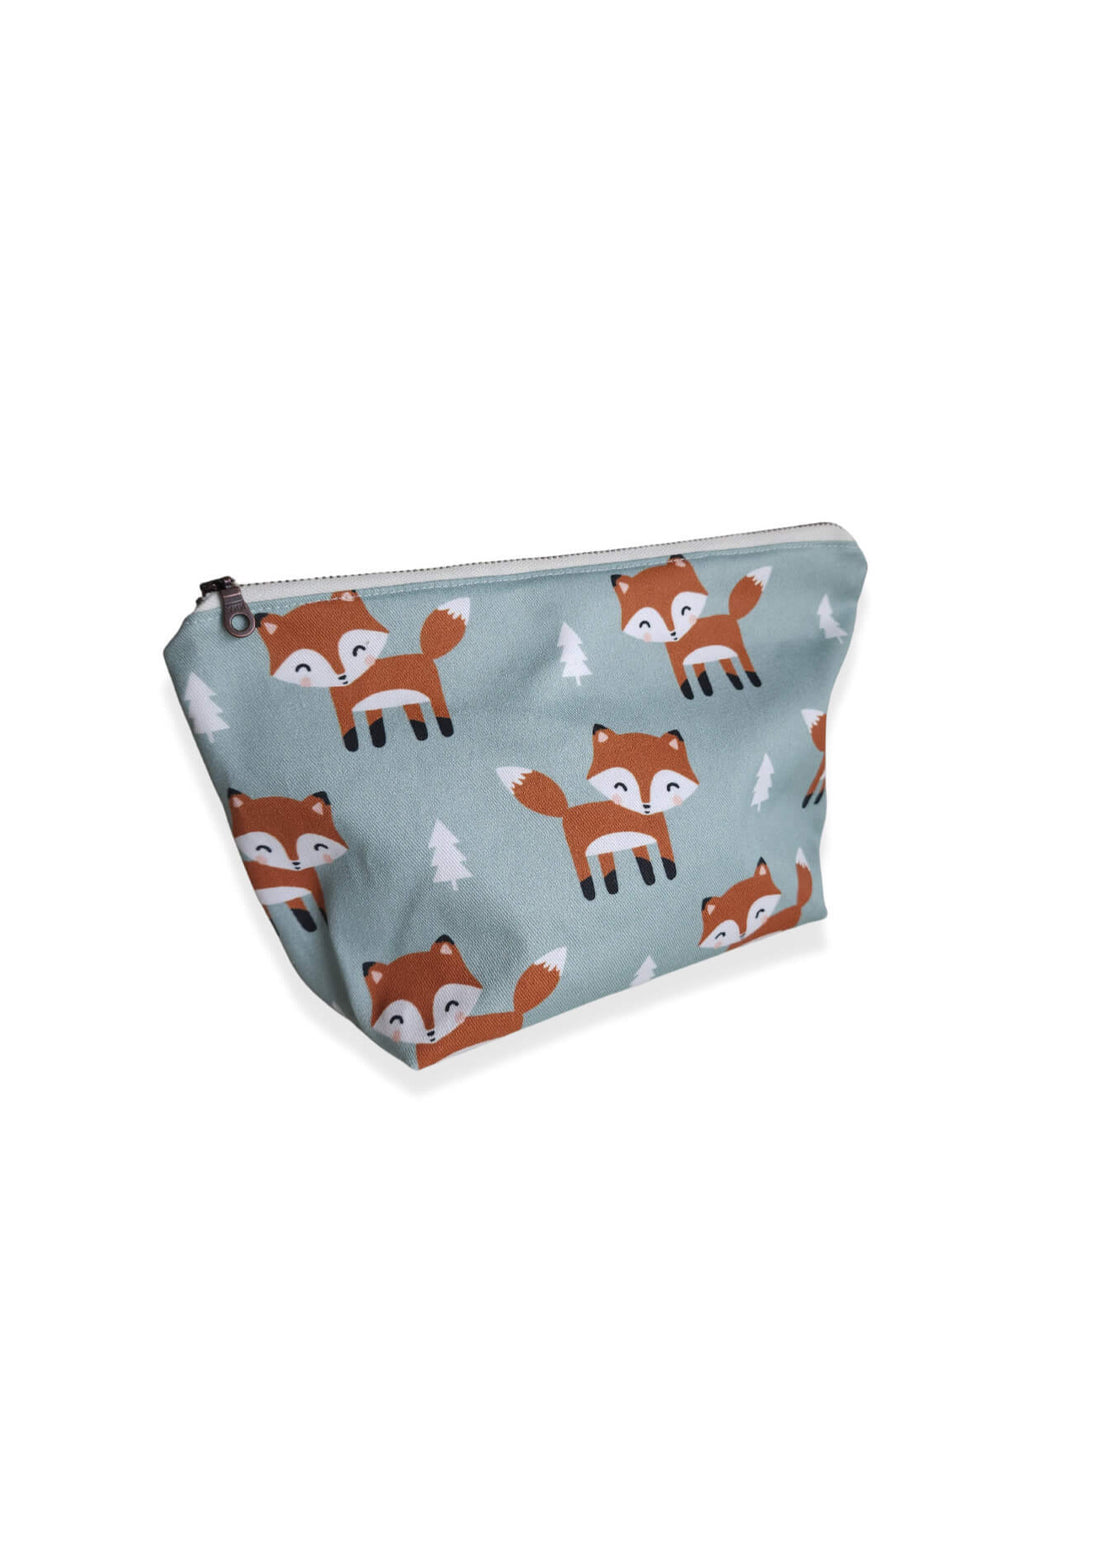 green zippered top pouch with orange foxes and white trees